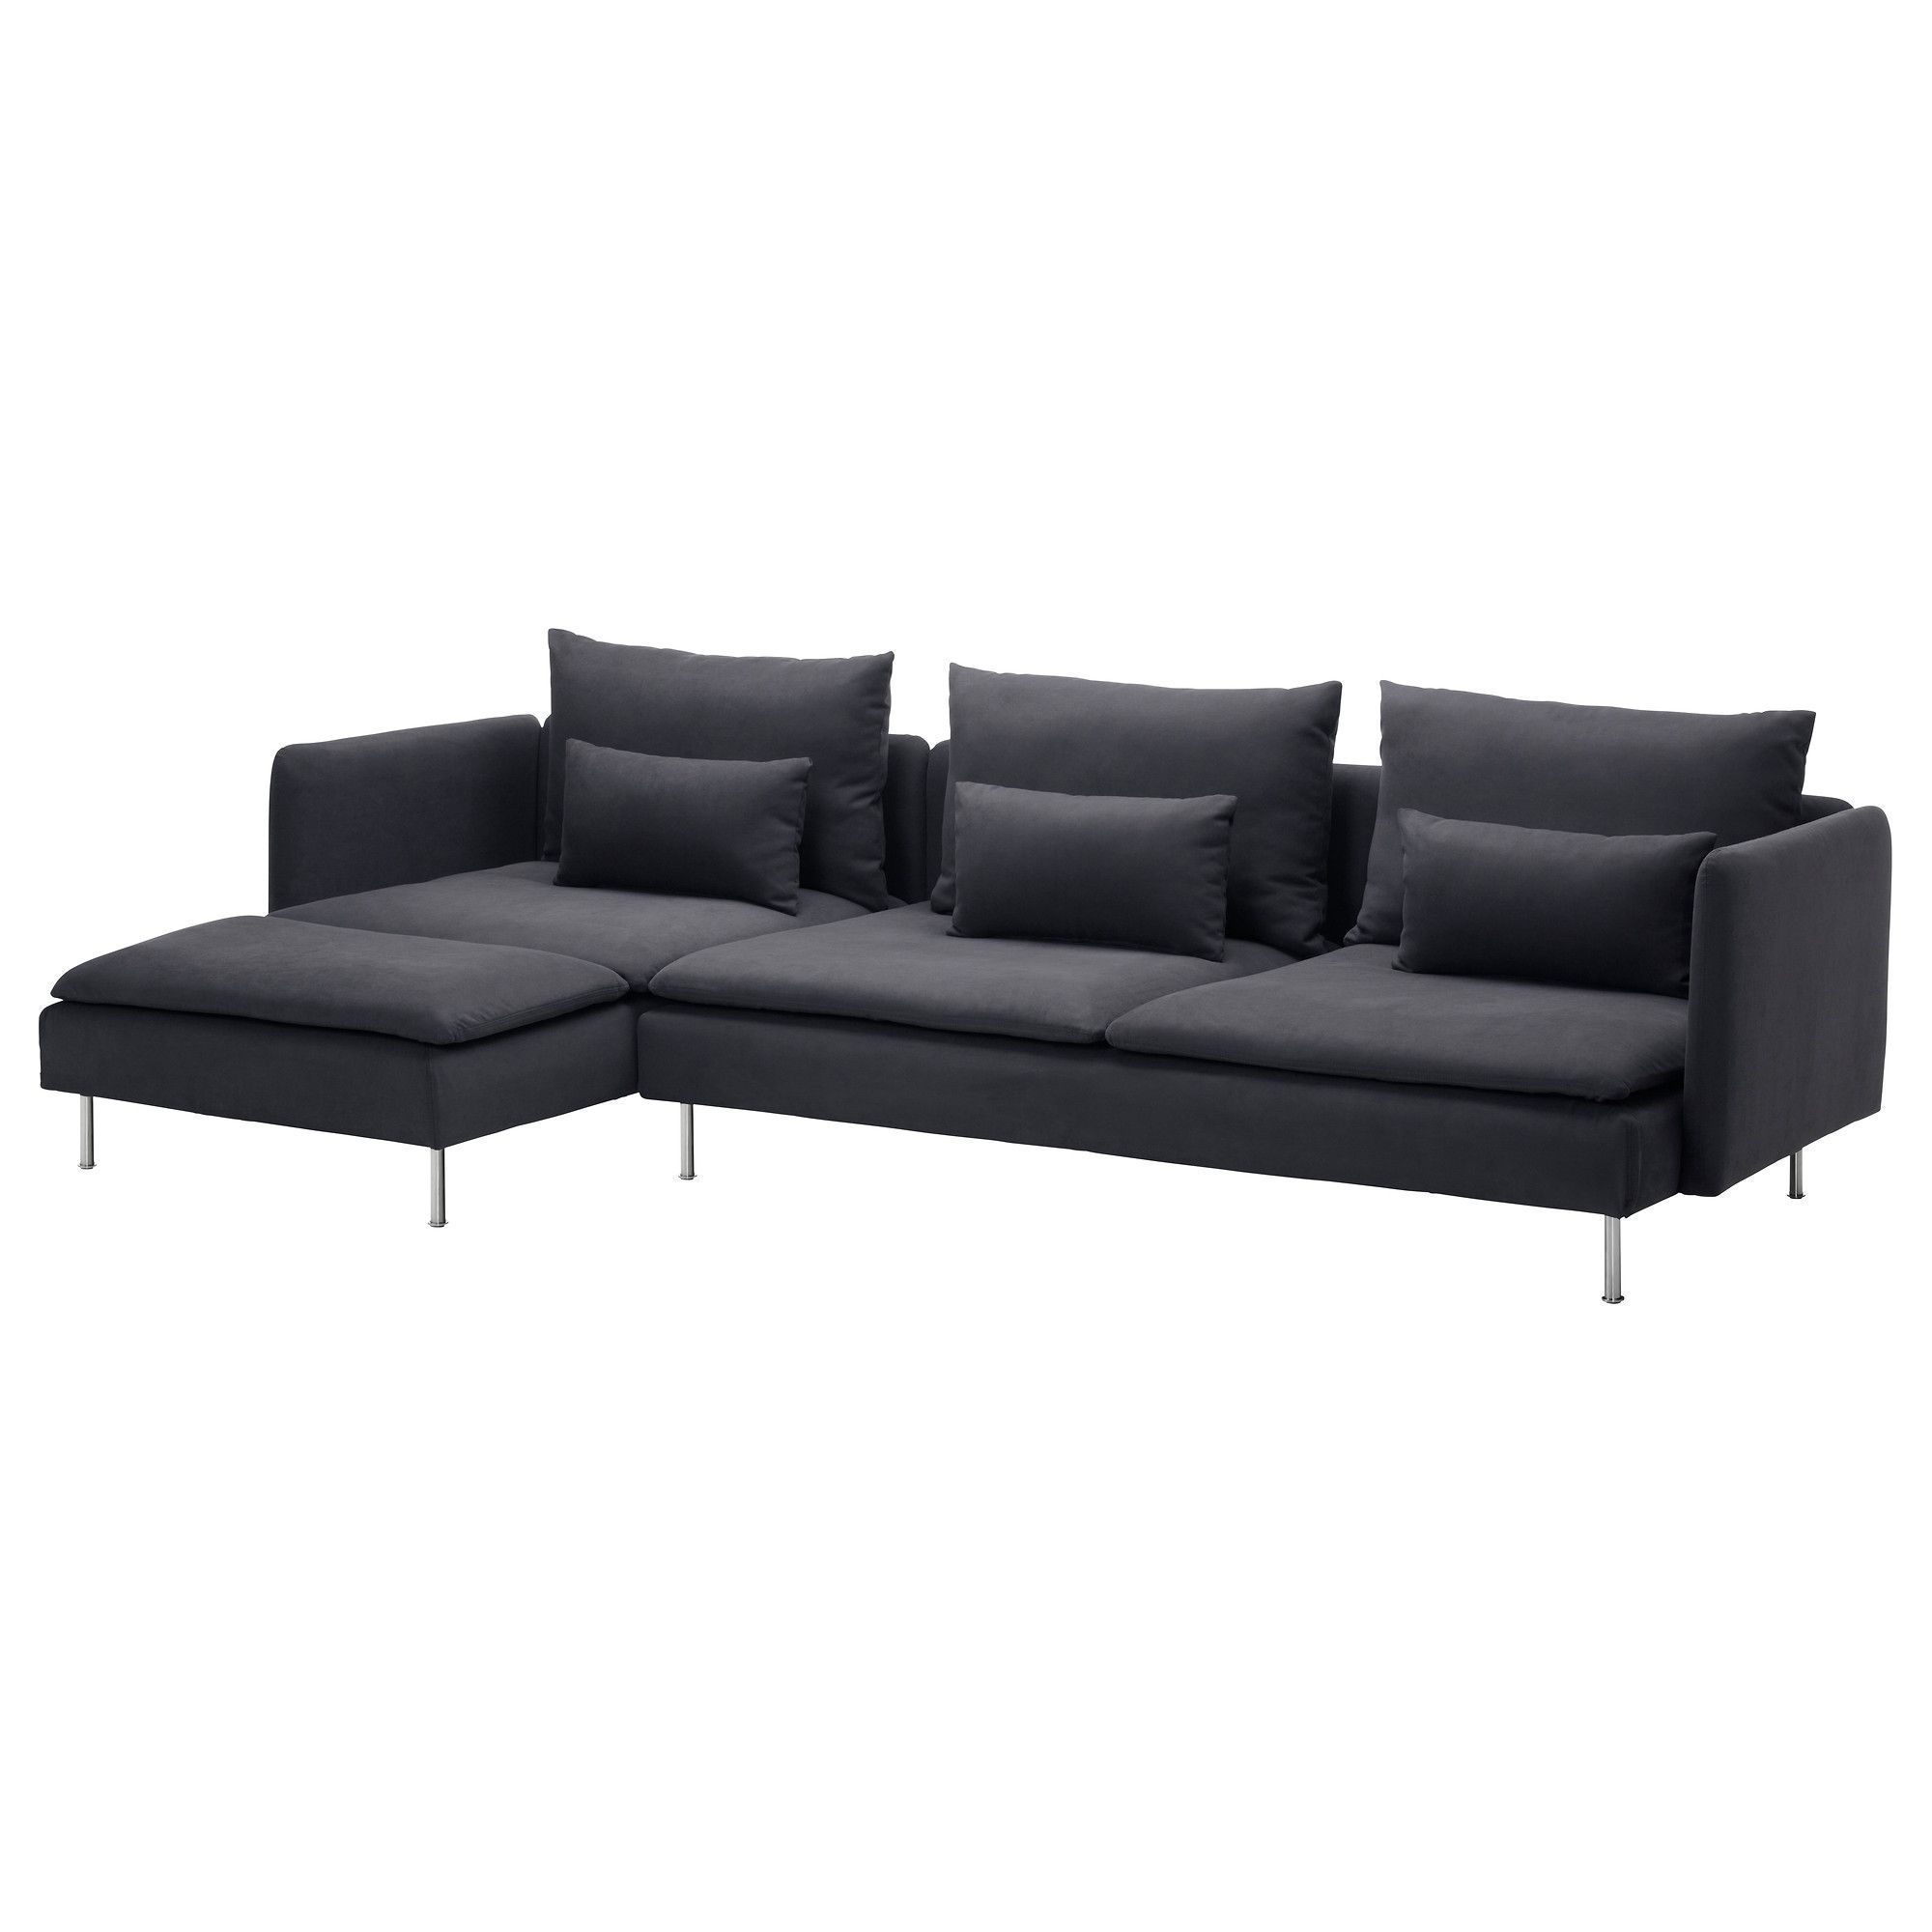 Us – Furniture And Home Furnishings | Ikea Sofa, Modular Pertaining To Riley Retro Mid Century Modern Fabric Upholstered Left Facing Chaise Sectional Sofas (View 2 of 15)